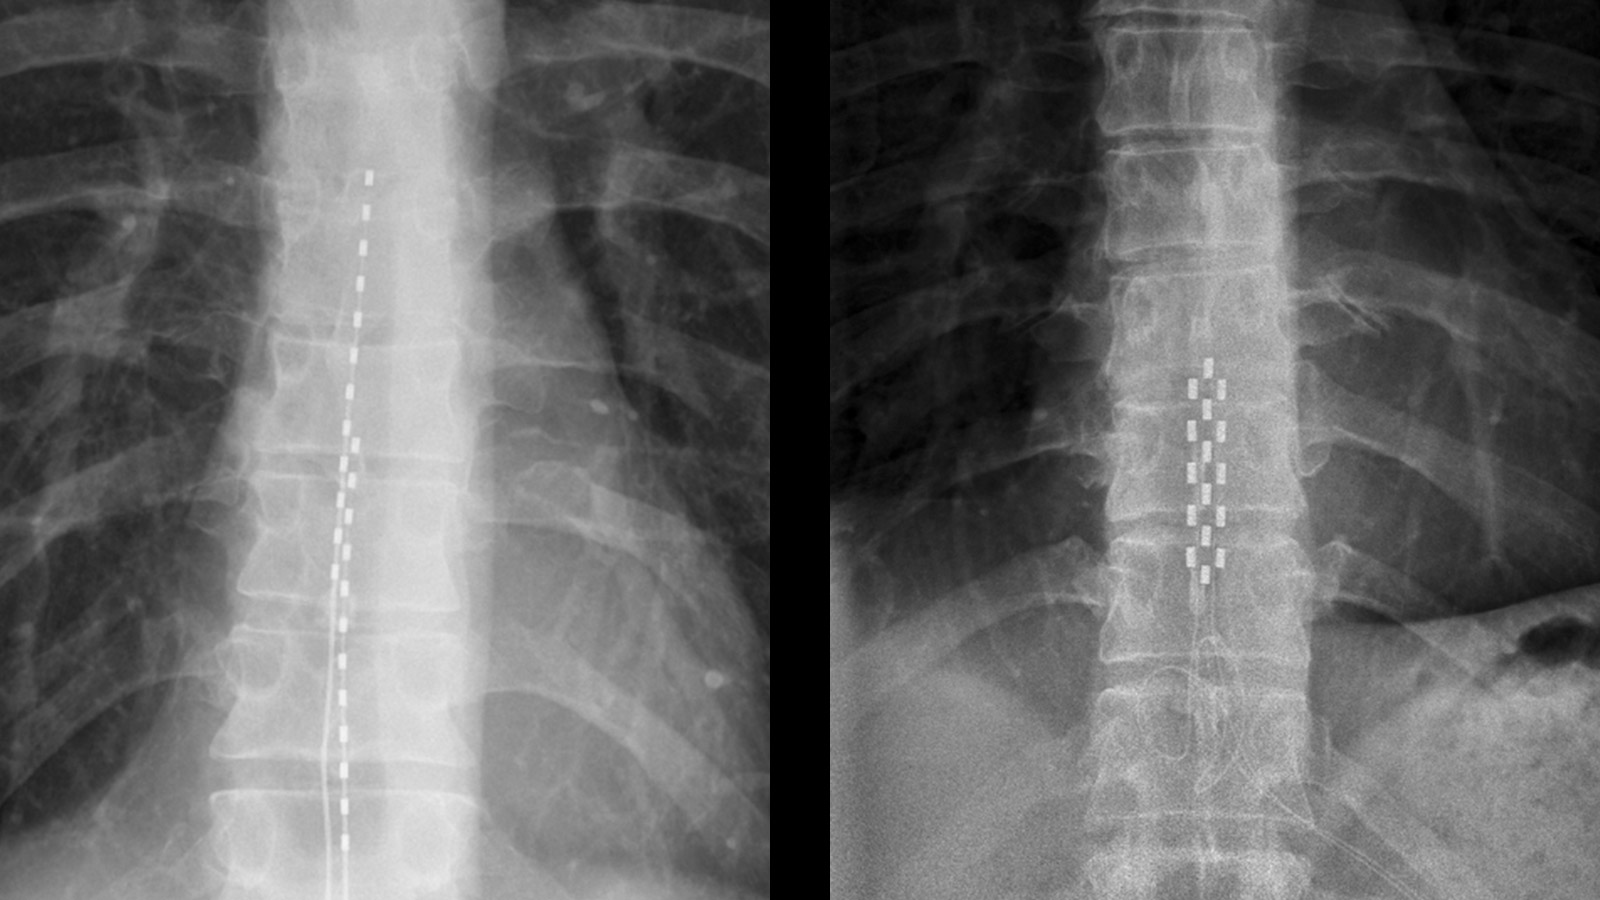 X-ray images of an implanted rod electrode (left) and plate electrode (right)